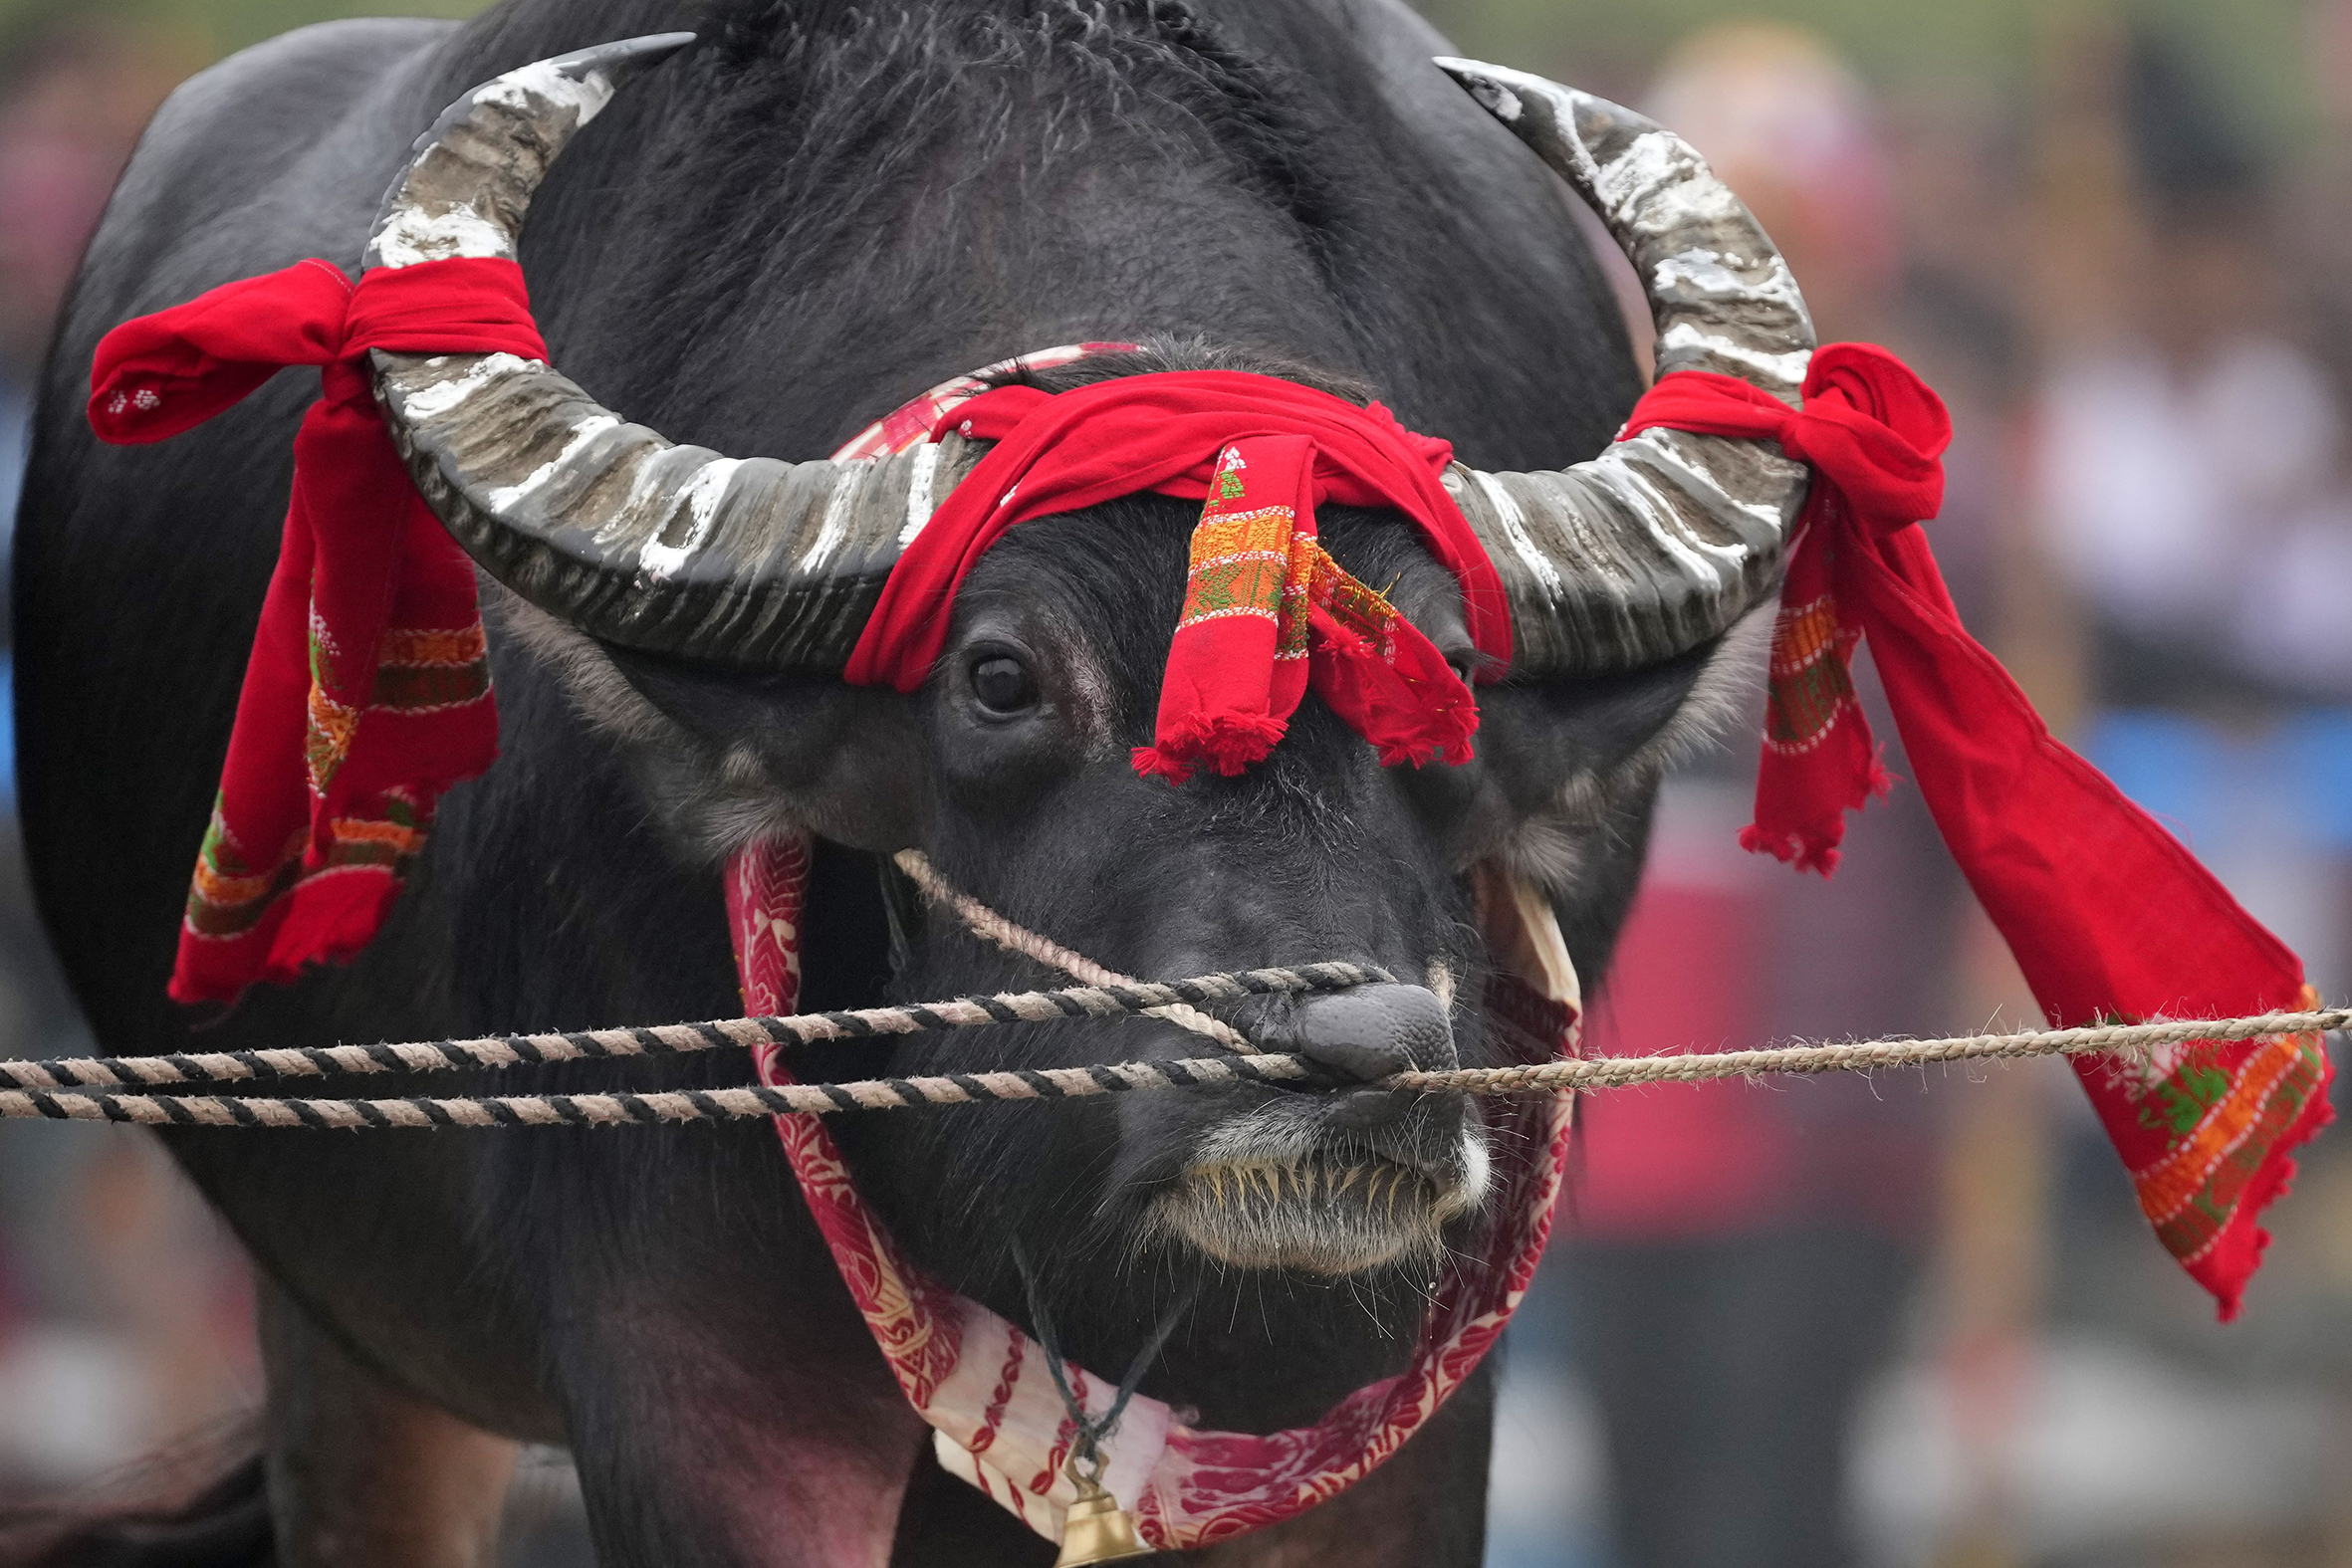 A buffalo is held by ropes passing through its nose as it waits for a buffalo fight